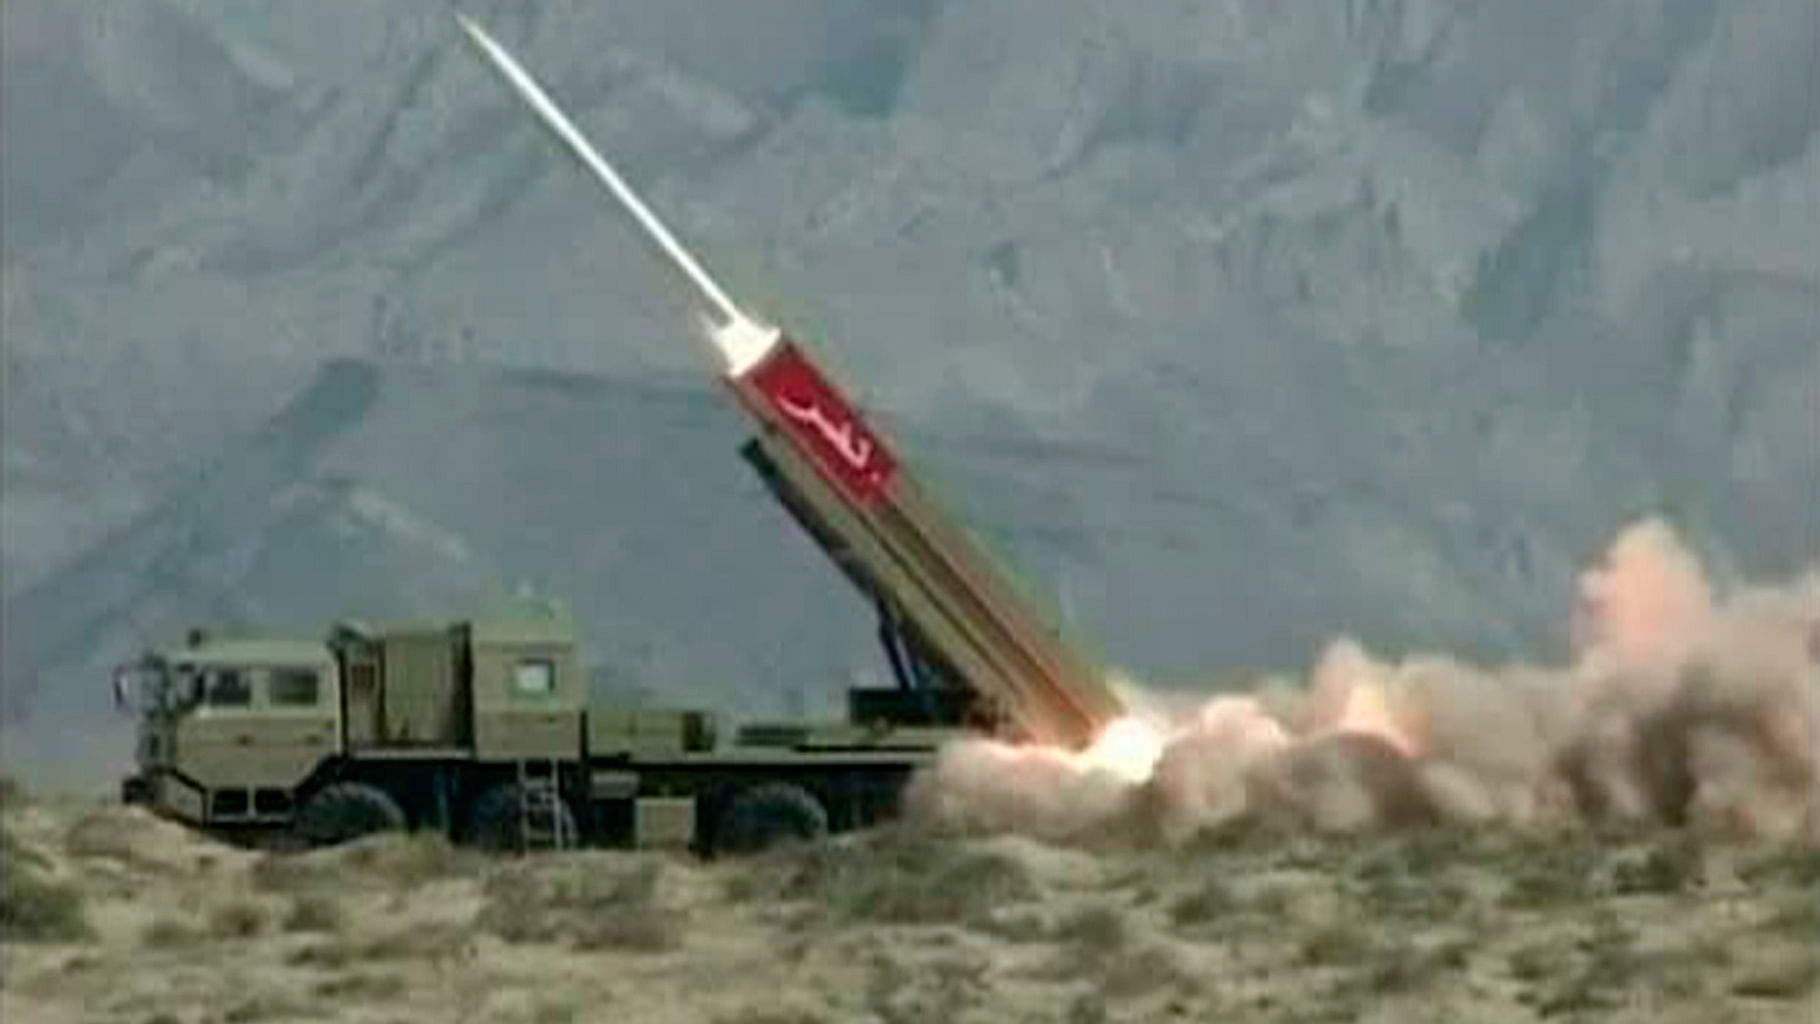 File photo from a Pakistan military handout video shows a Hatf IX (NASR) missile being fired during a test at an undisclosed location in Pakistan, 19 April 2011. (Photo: Reuters)